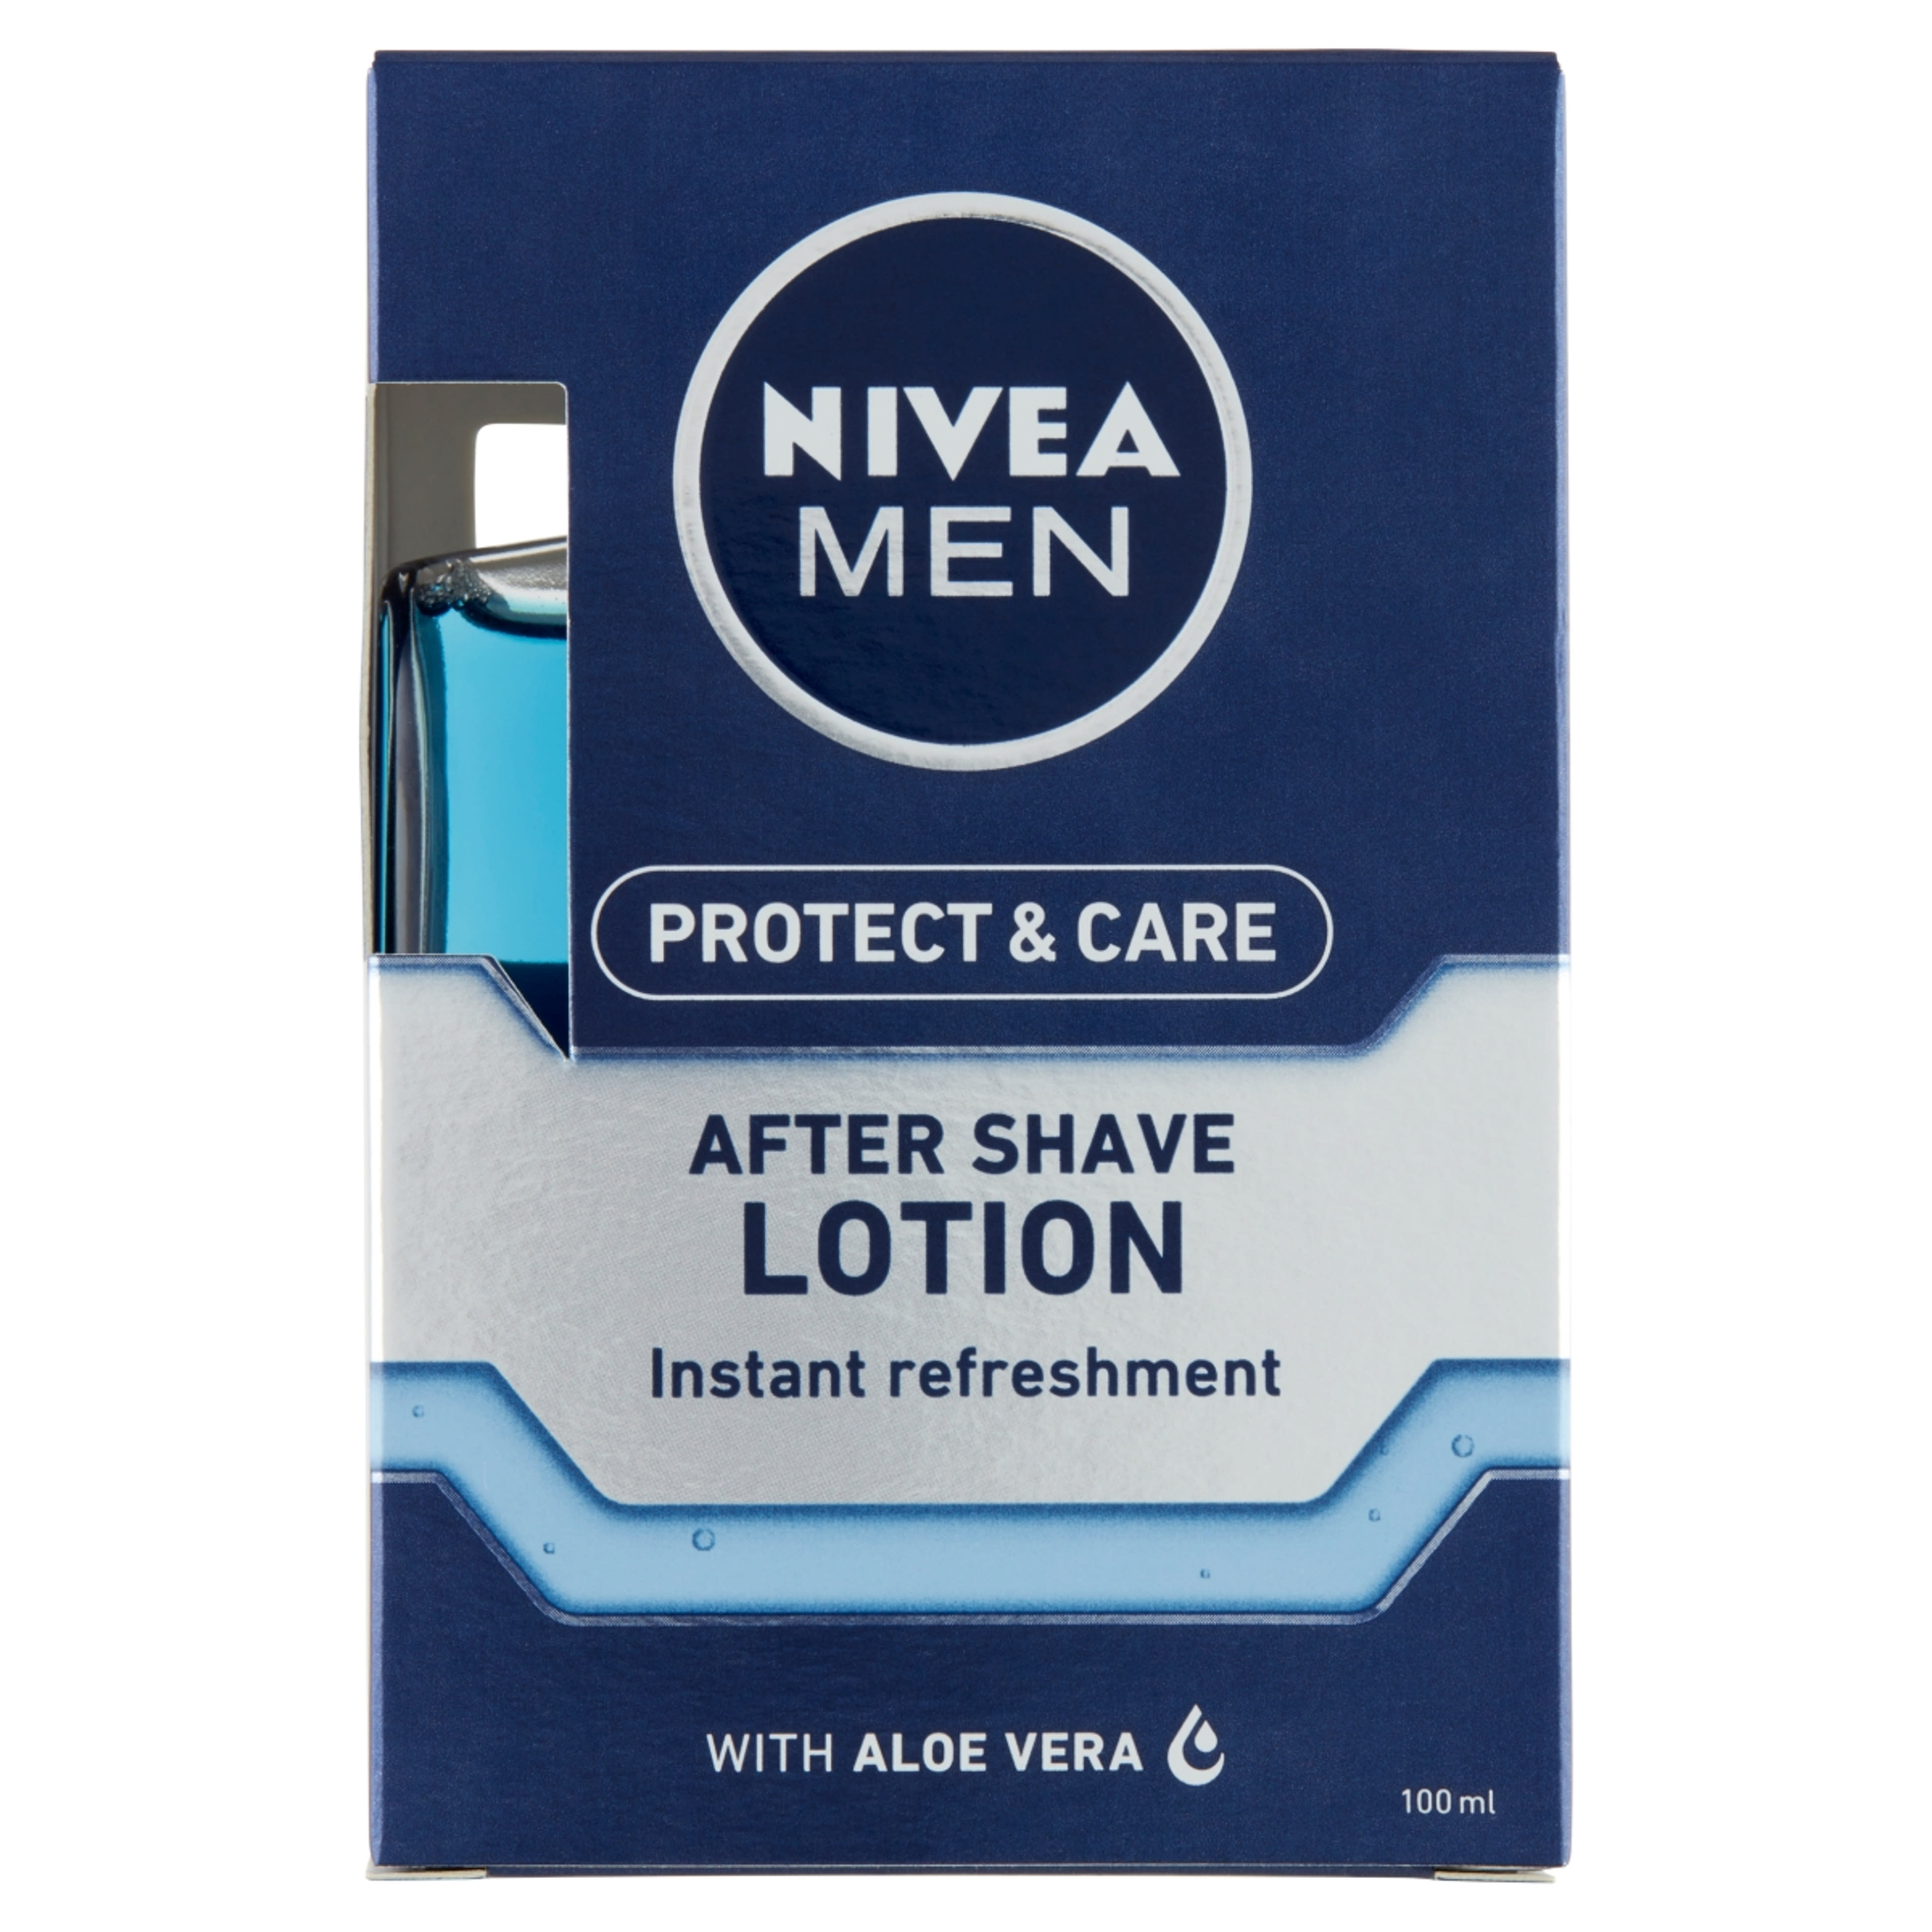 Nivea Men Protect & Care After Shave Lotion - 100 ml-1